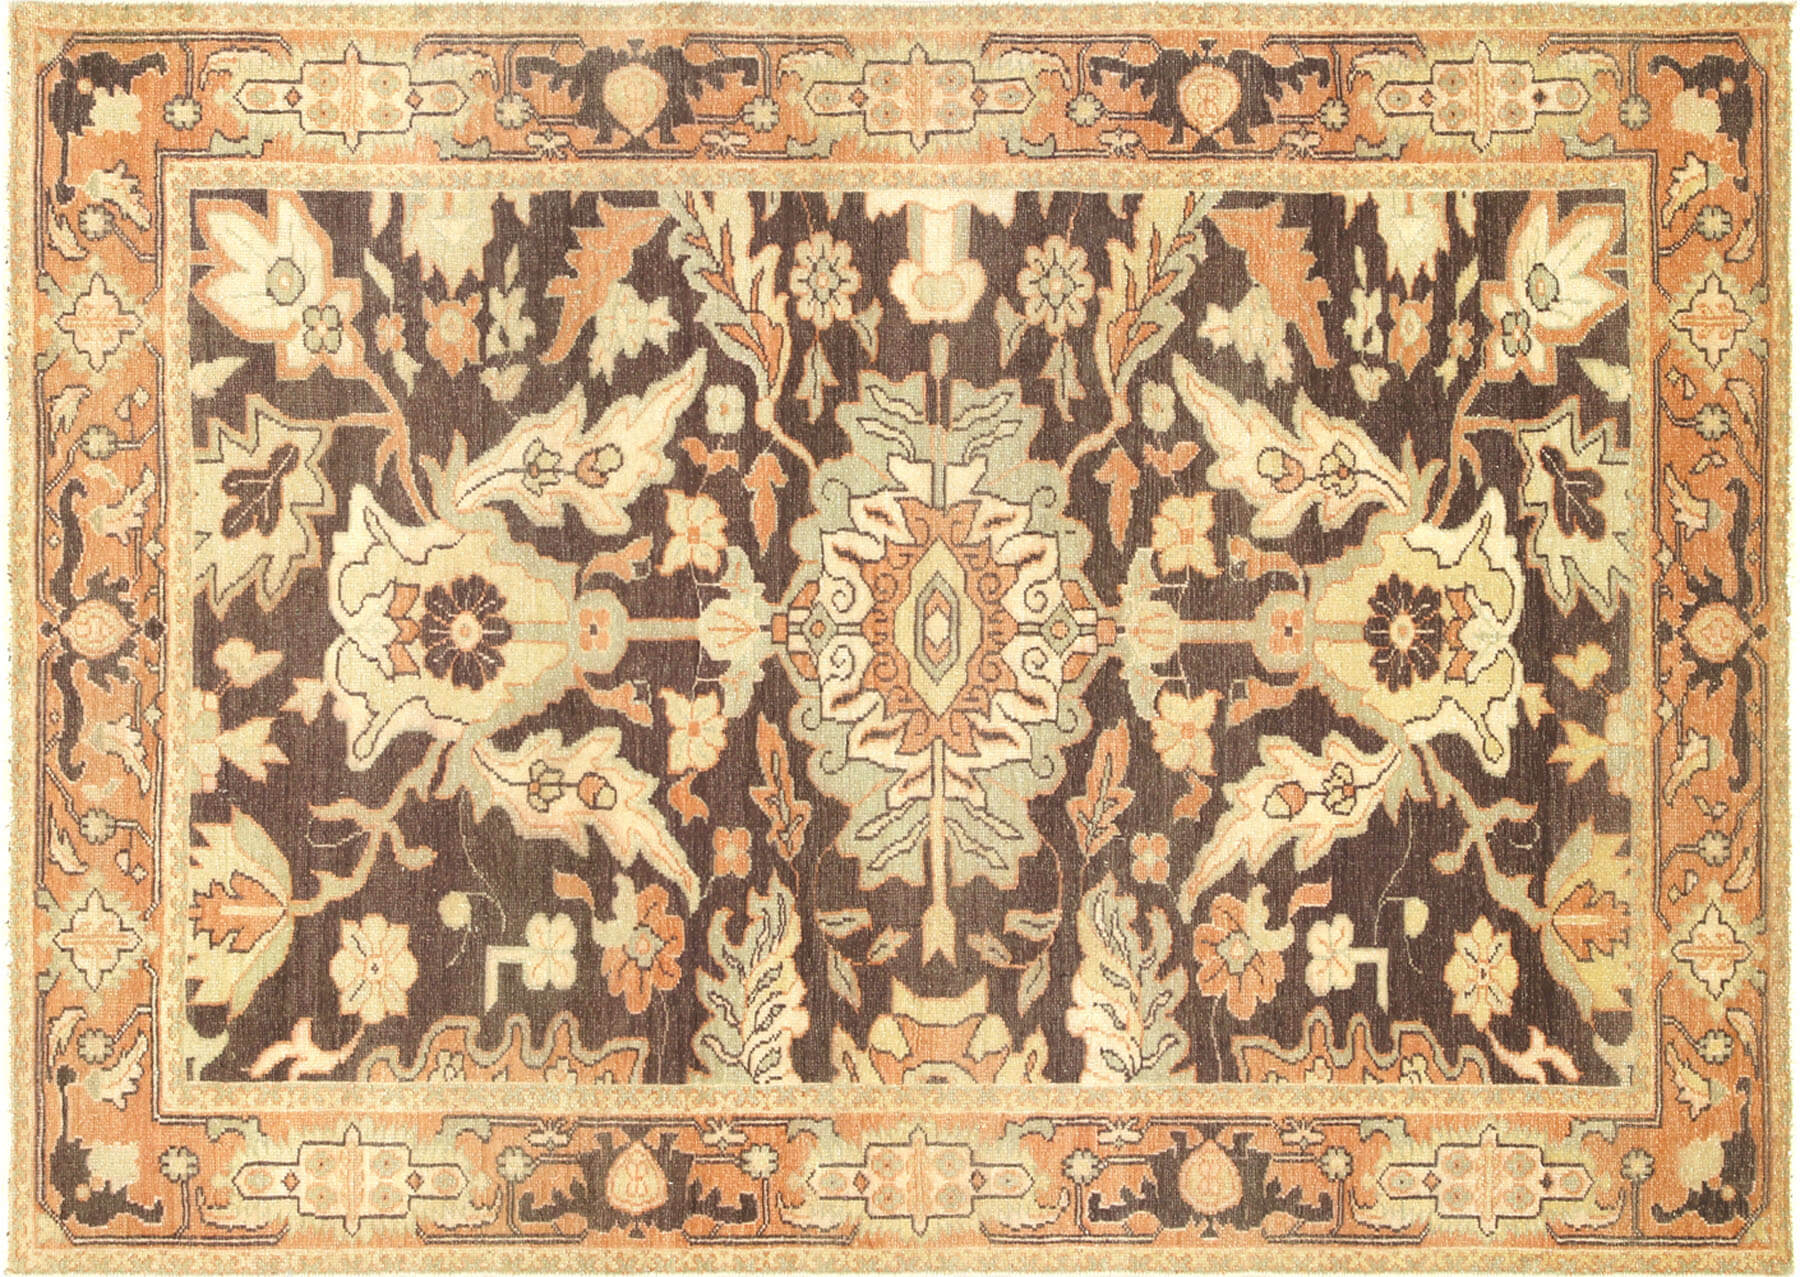 Recently Woven Egyptian Sultanabad Rug - 4'5" x 6'3"